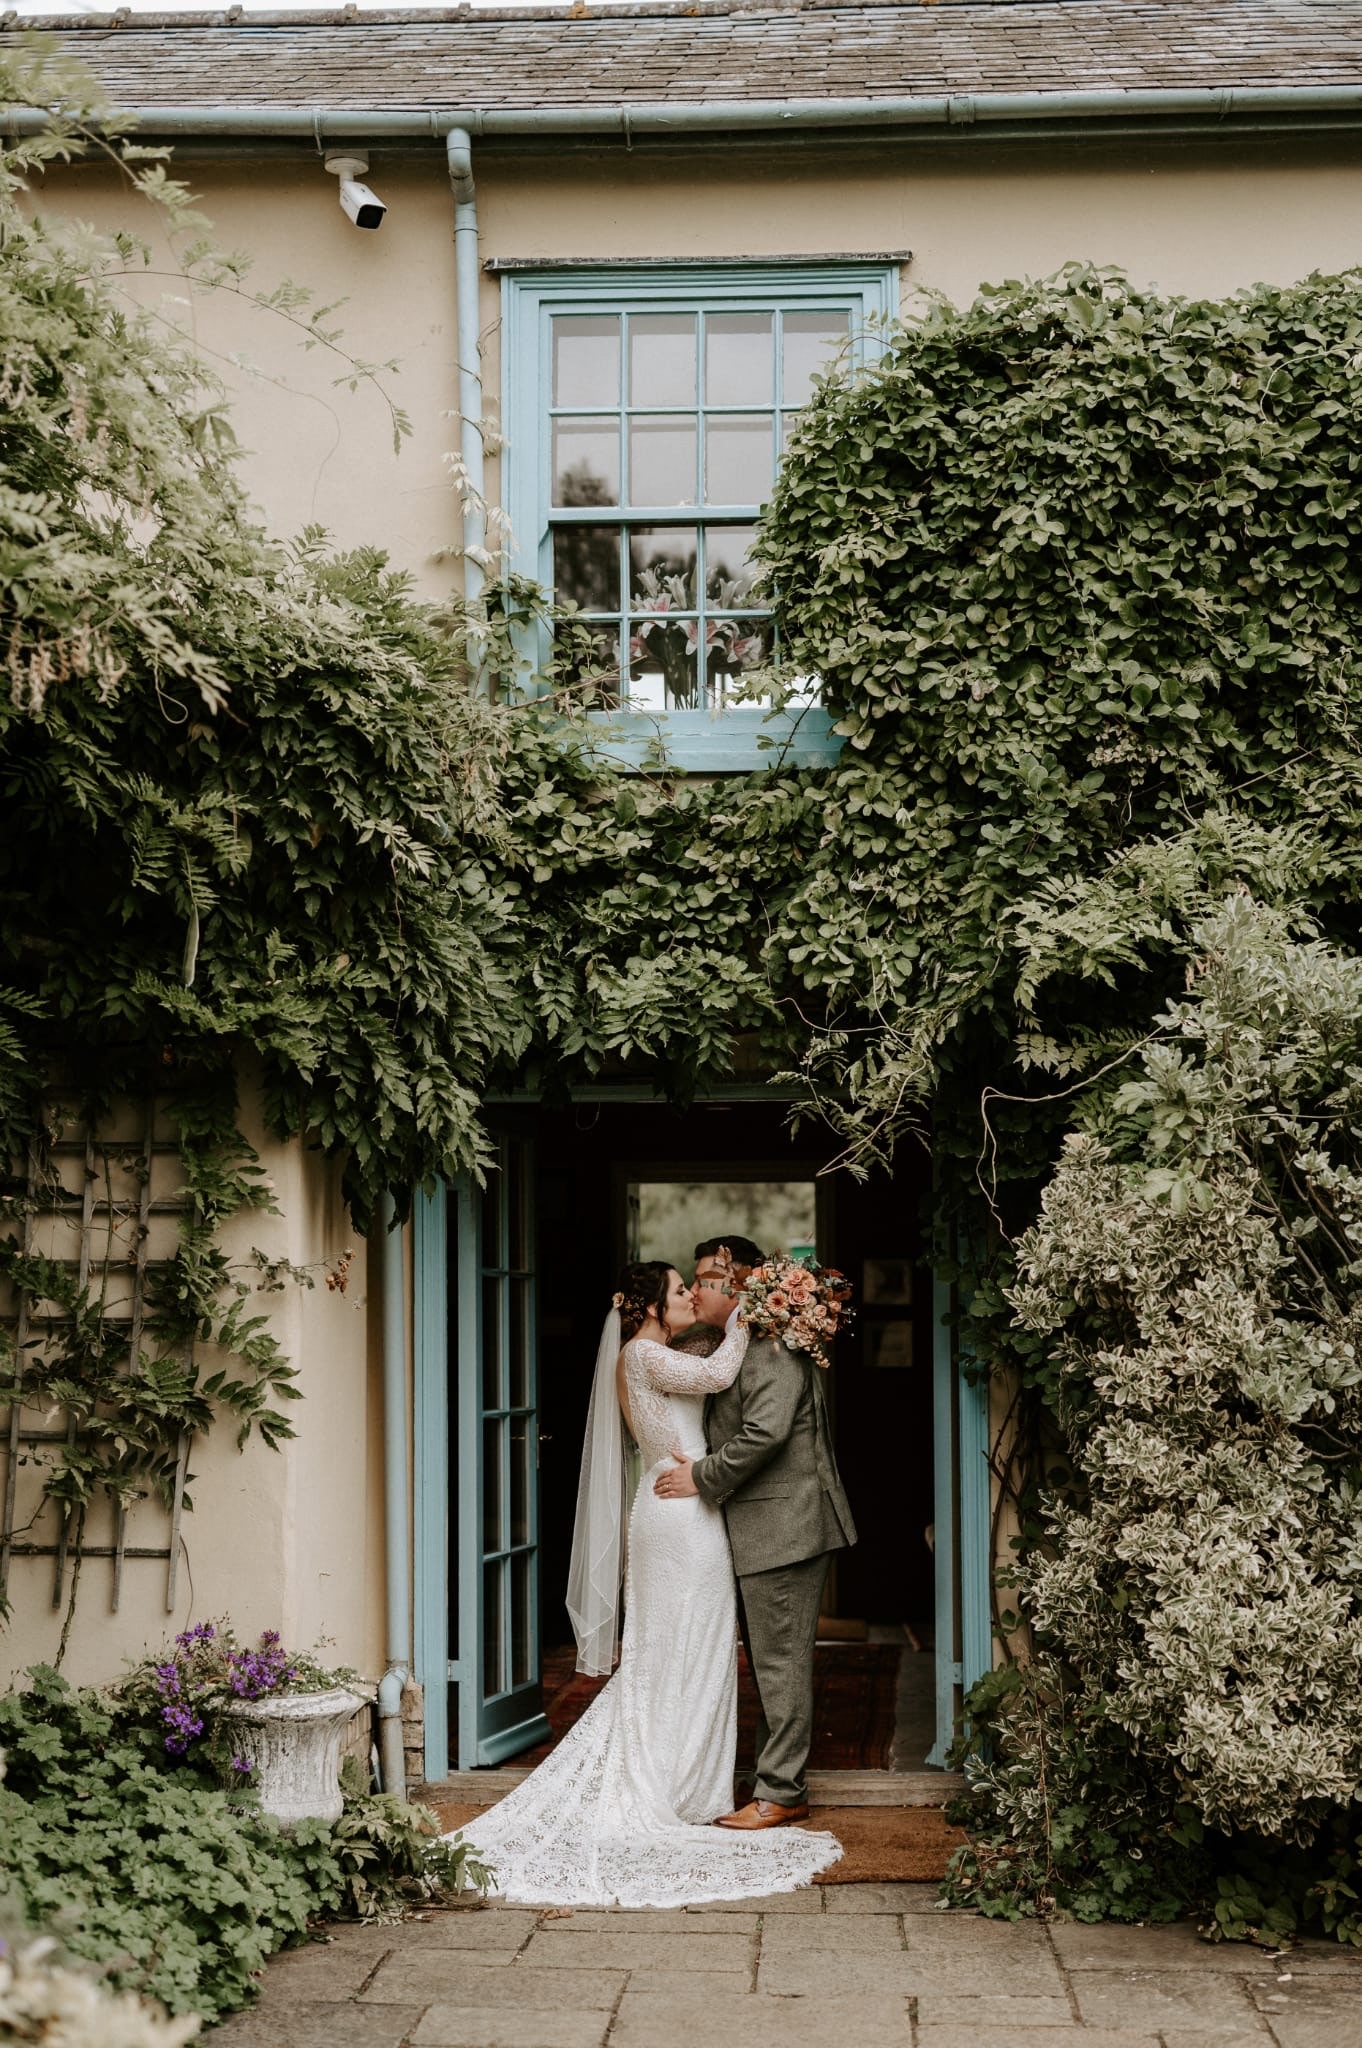 Country house wedding venue bride and groom kiss in blue doorway surrounded by green foliage at autumn wedding 